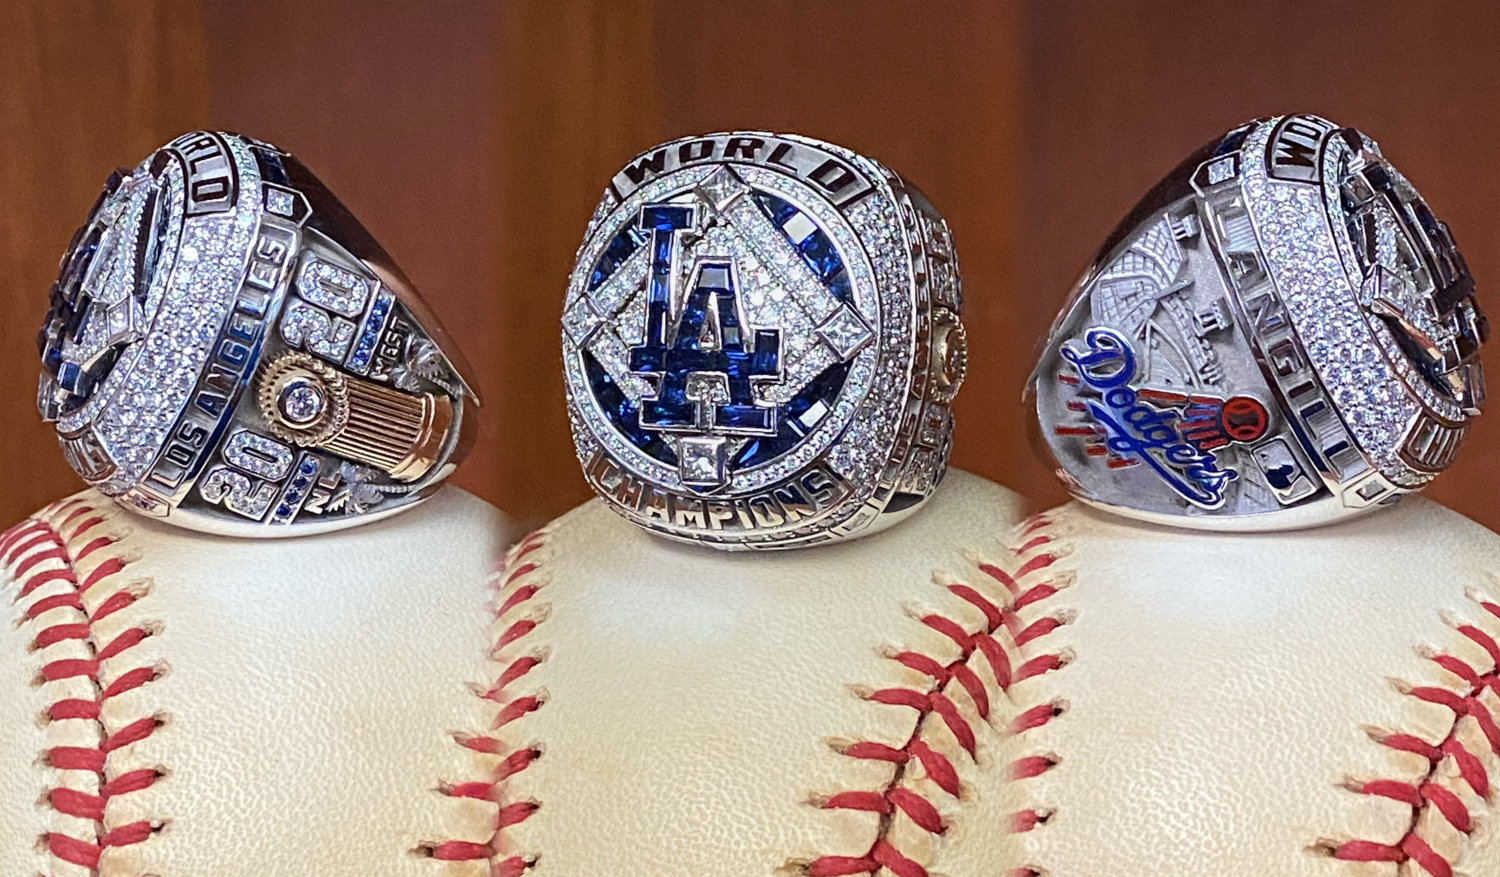 The Dodgers' World Series “last out” baseballs, by Mark Langill